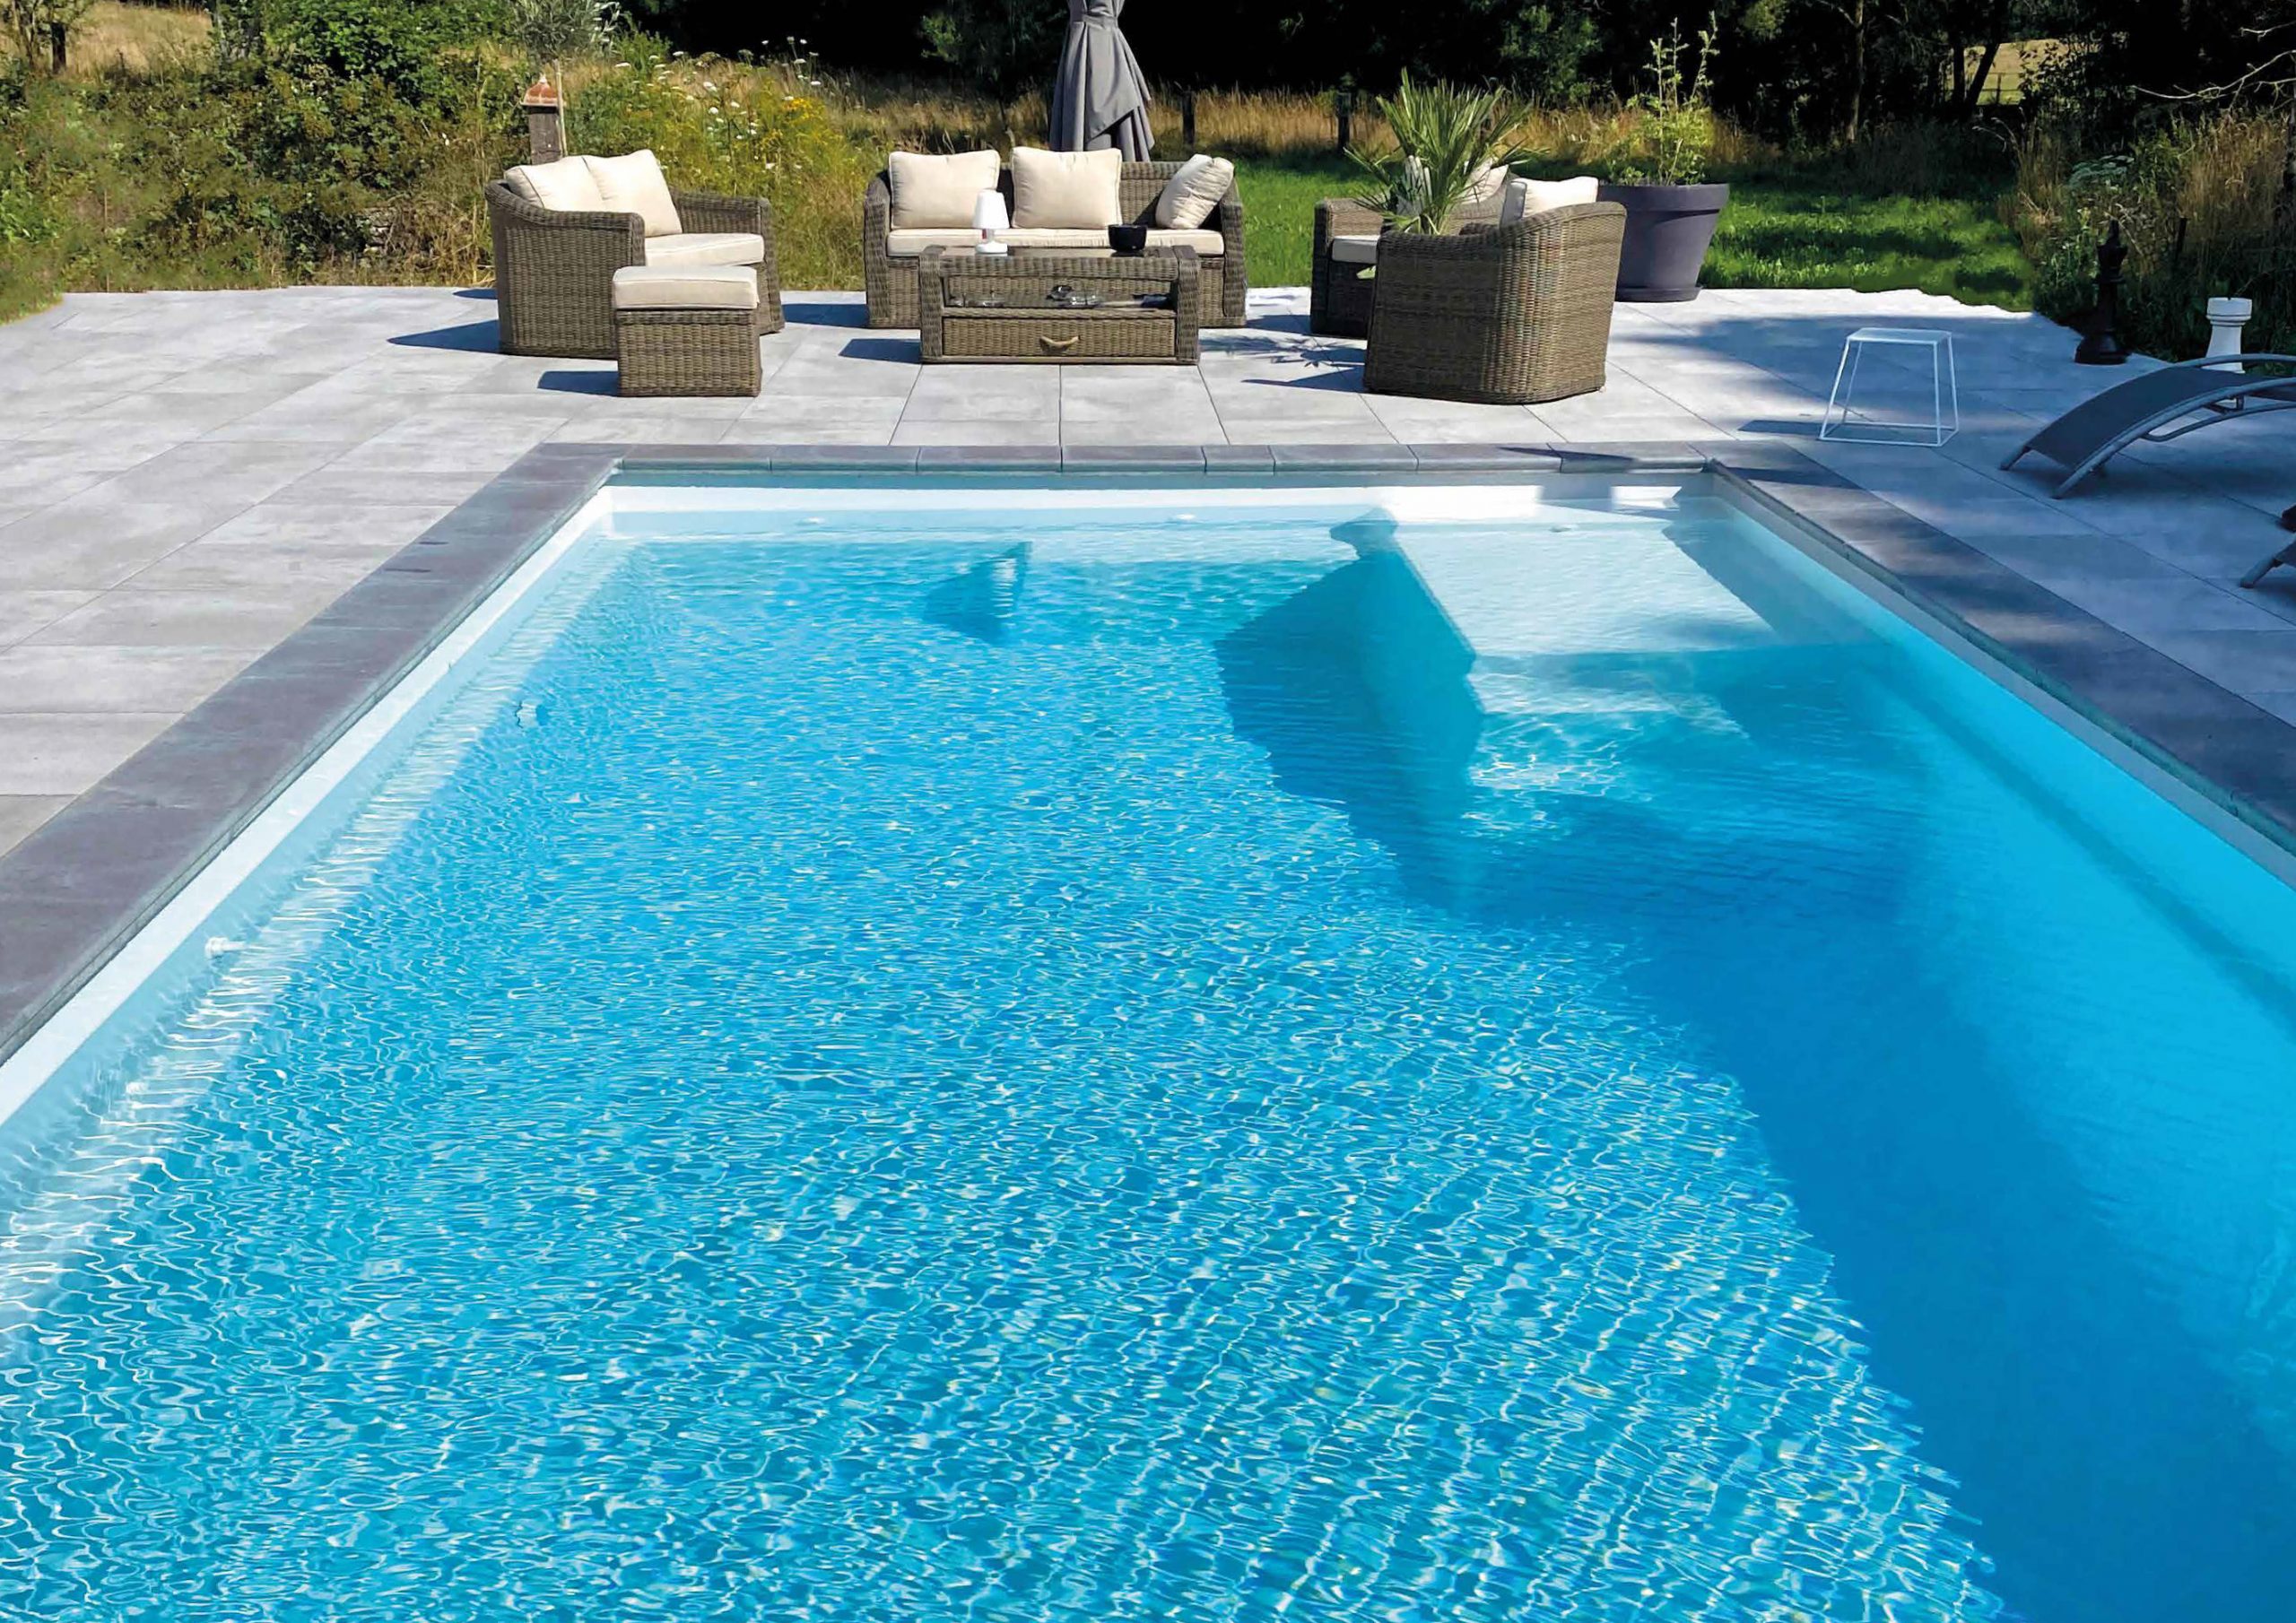 Maia 83 Flat Bottomed Ceramic de Luxe Swimming Pool | Bakewell Pools